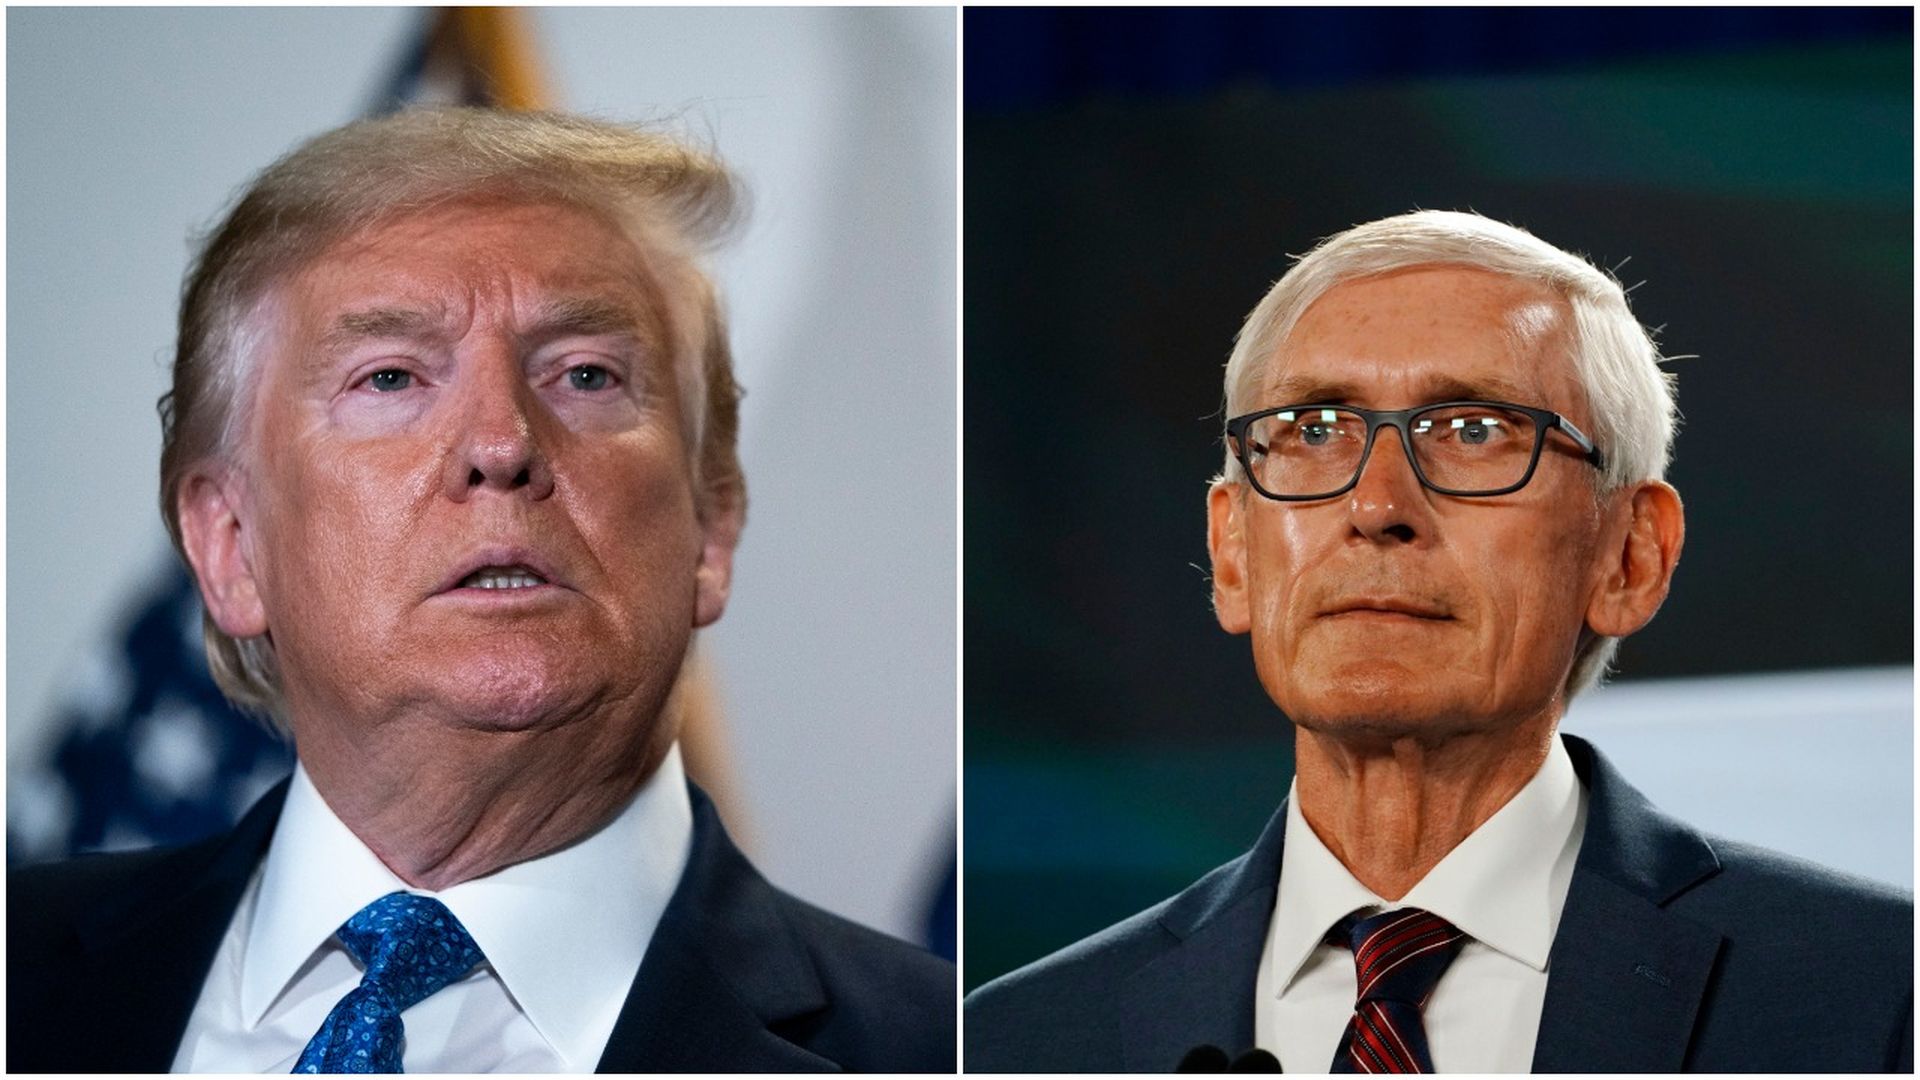 Combination images of President Trump and Wisconsin Gov. Tony Evers.